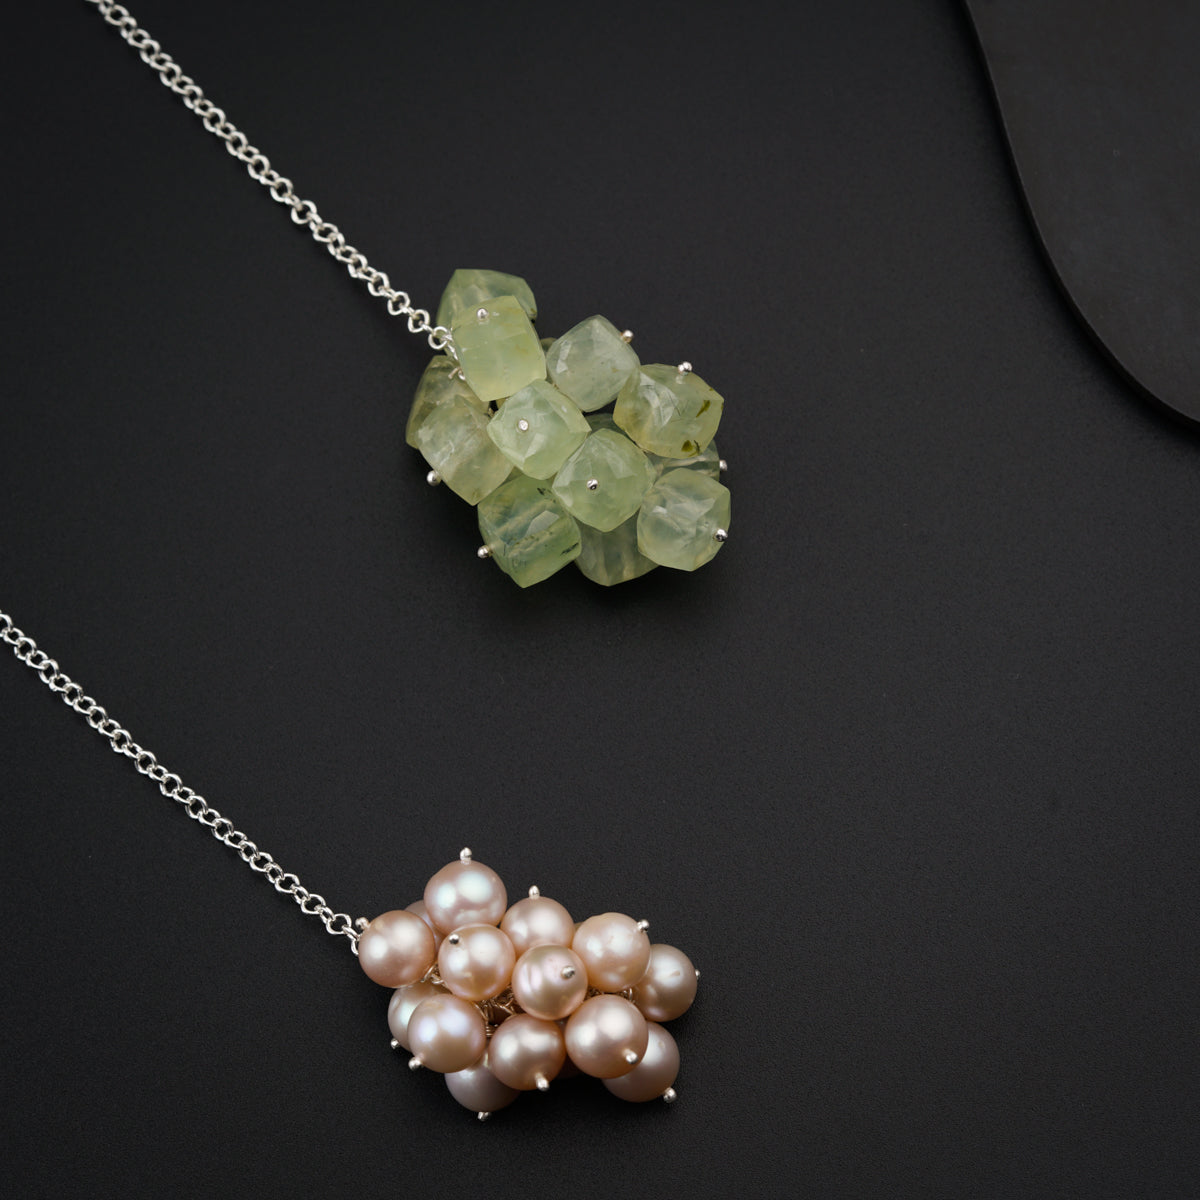 Tie and Wear Necklace: Freshwater Pearls And Prehnite